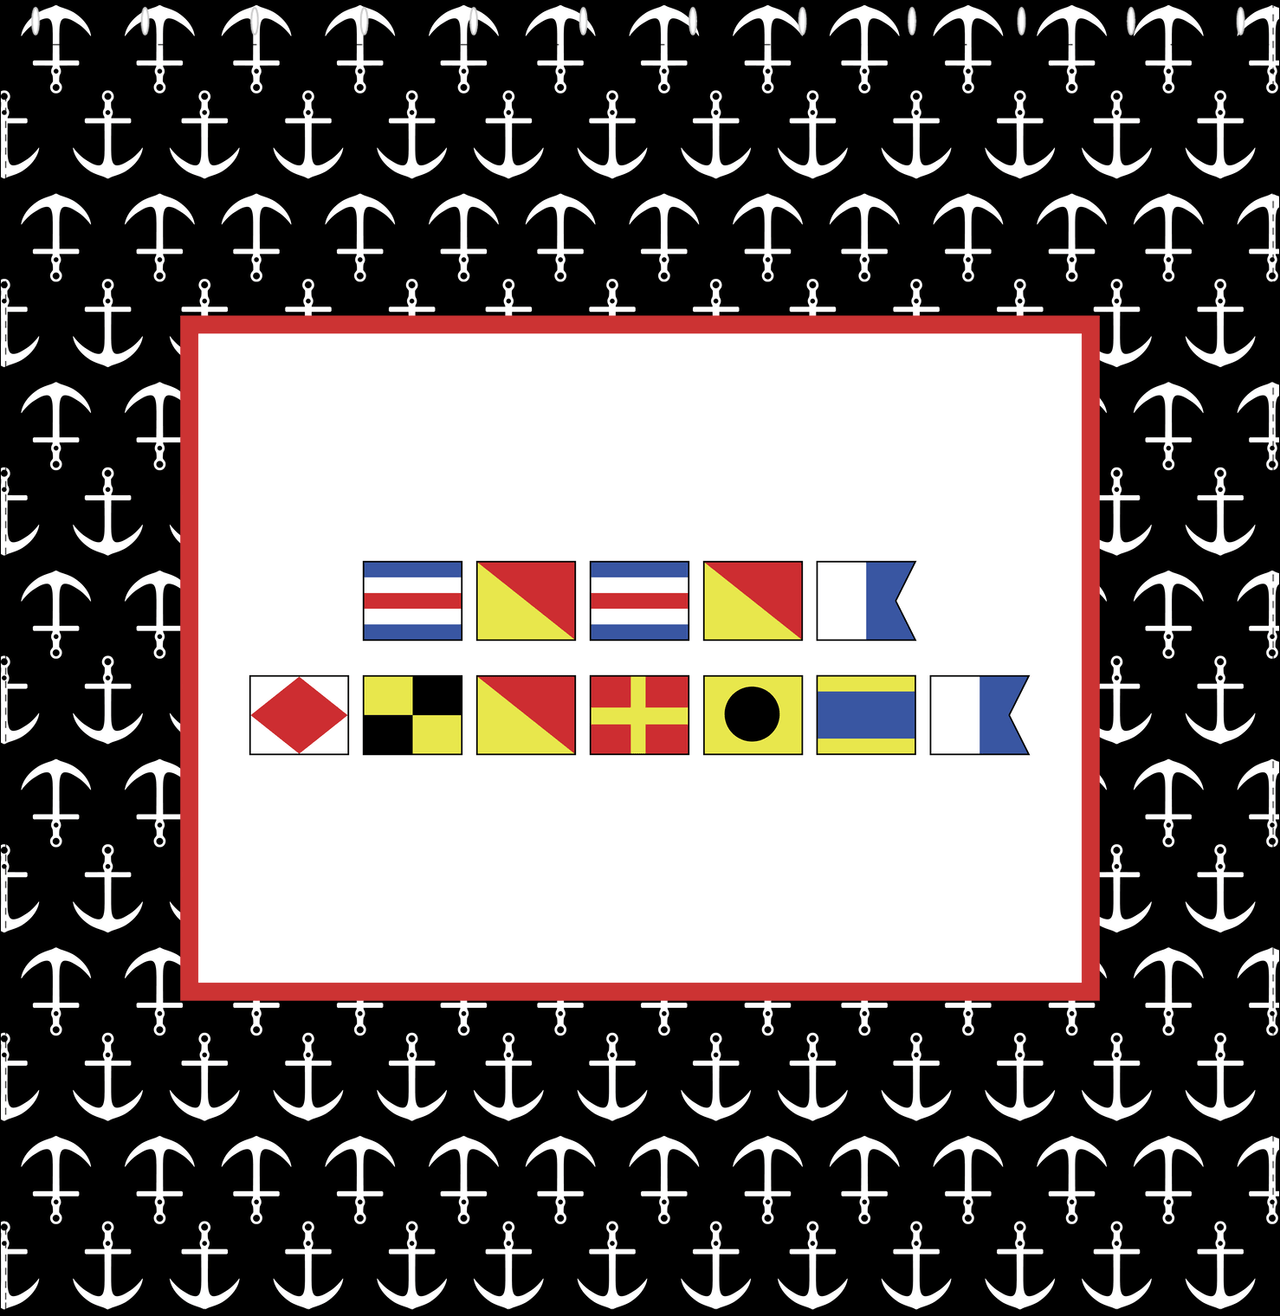 Personalized Nautical Flags Shower Curtain with Anchors - Black and Red - Flags without Letters - Decorate View